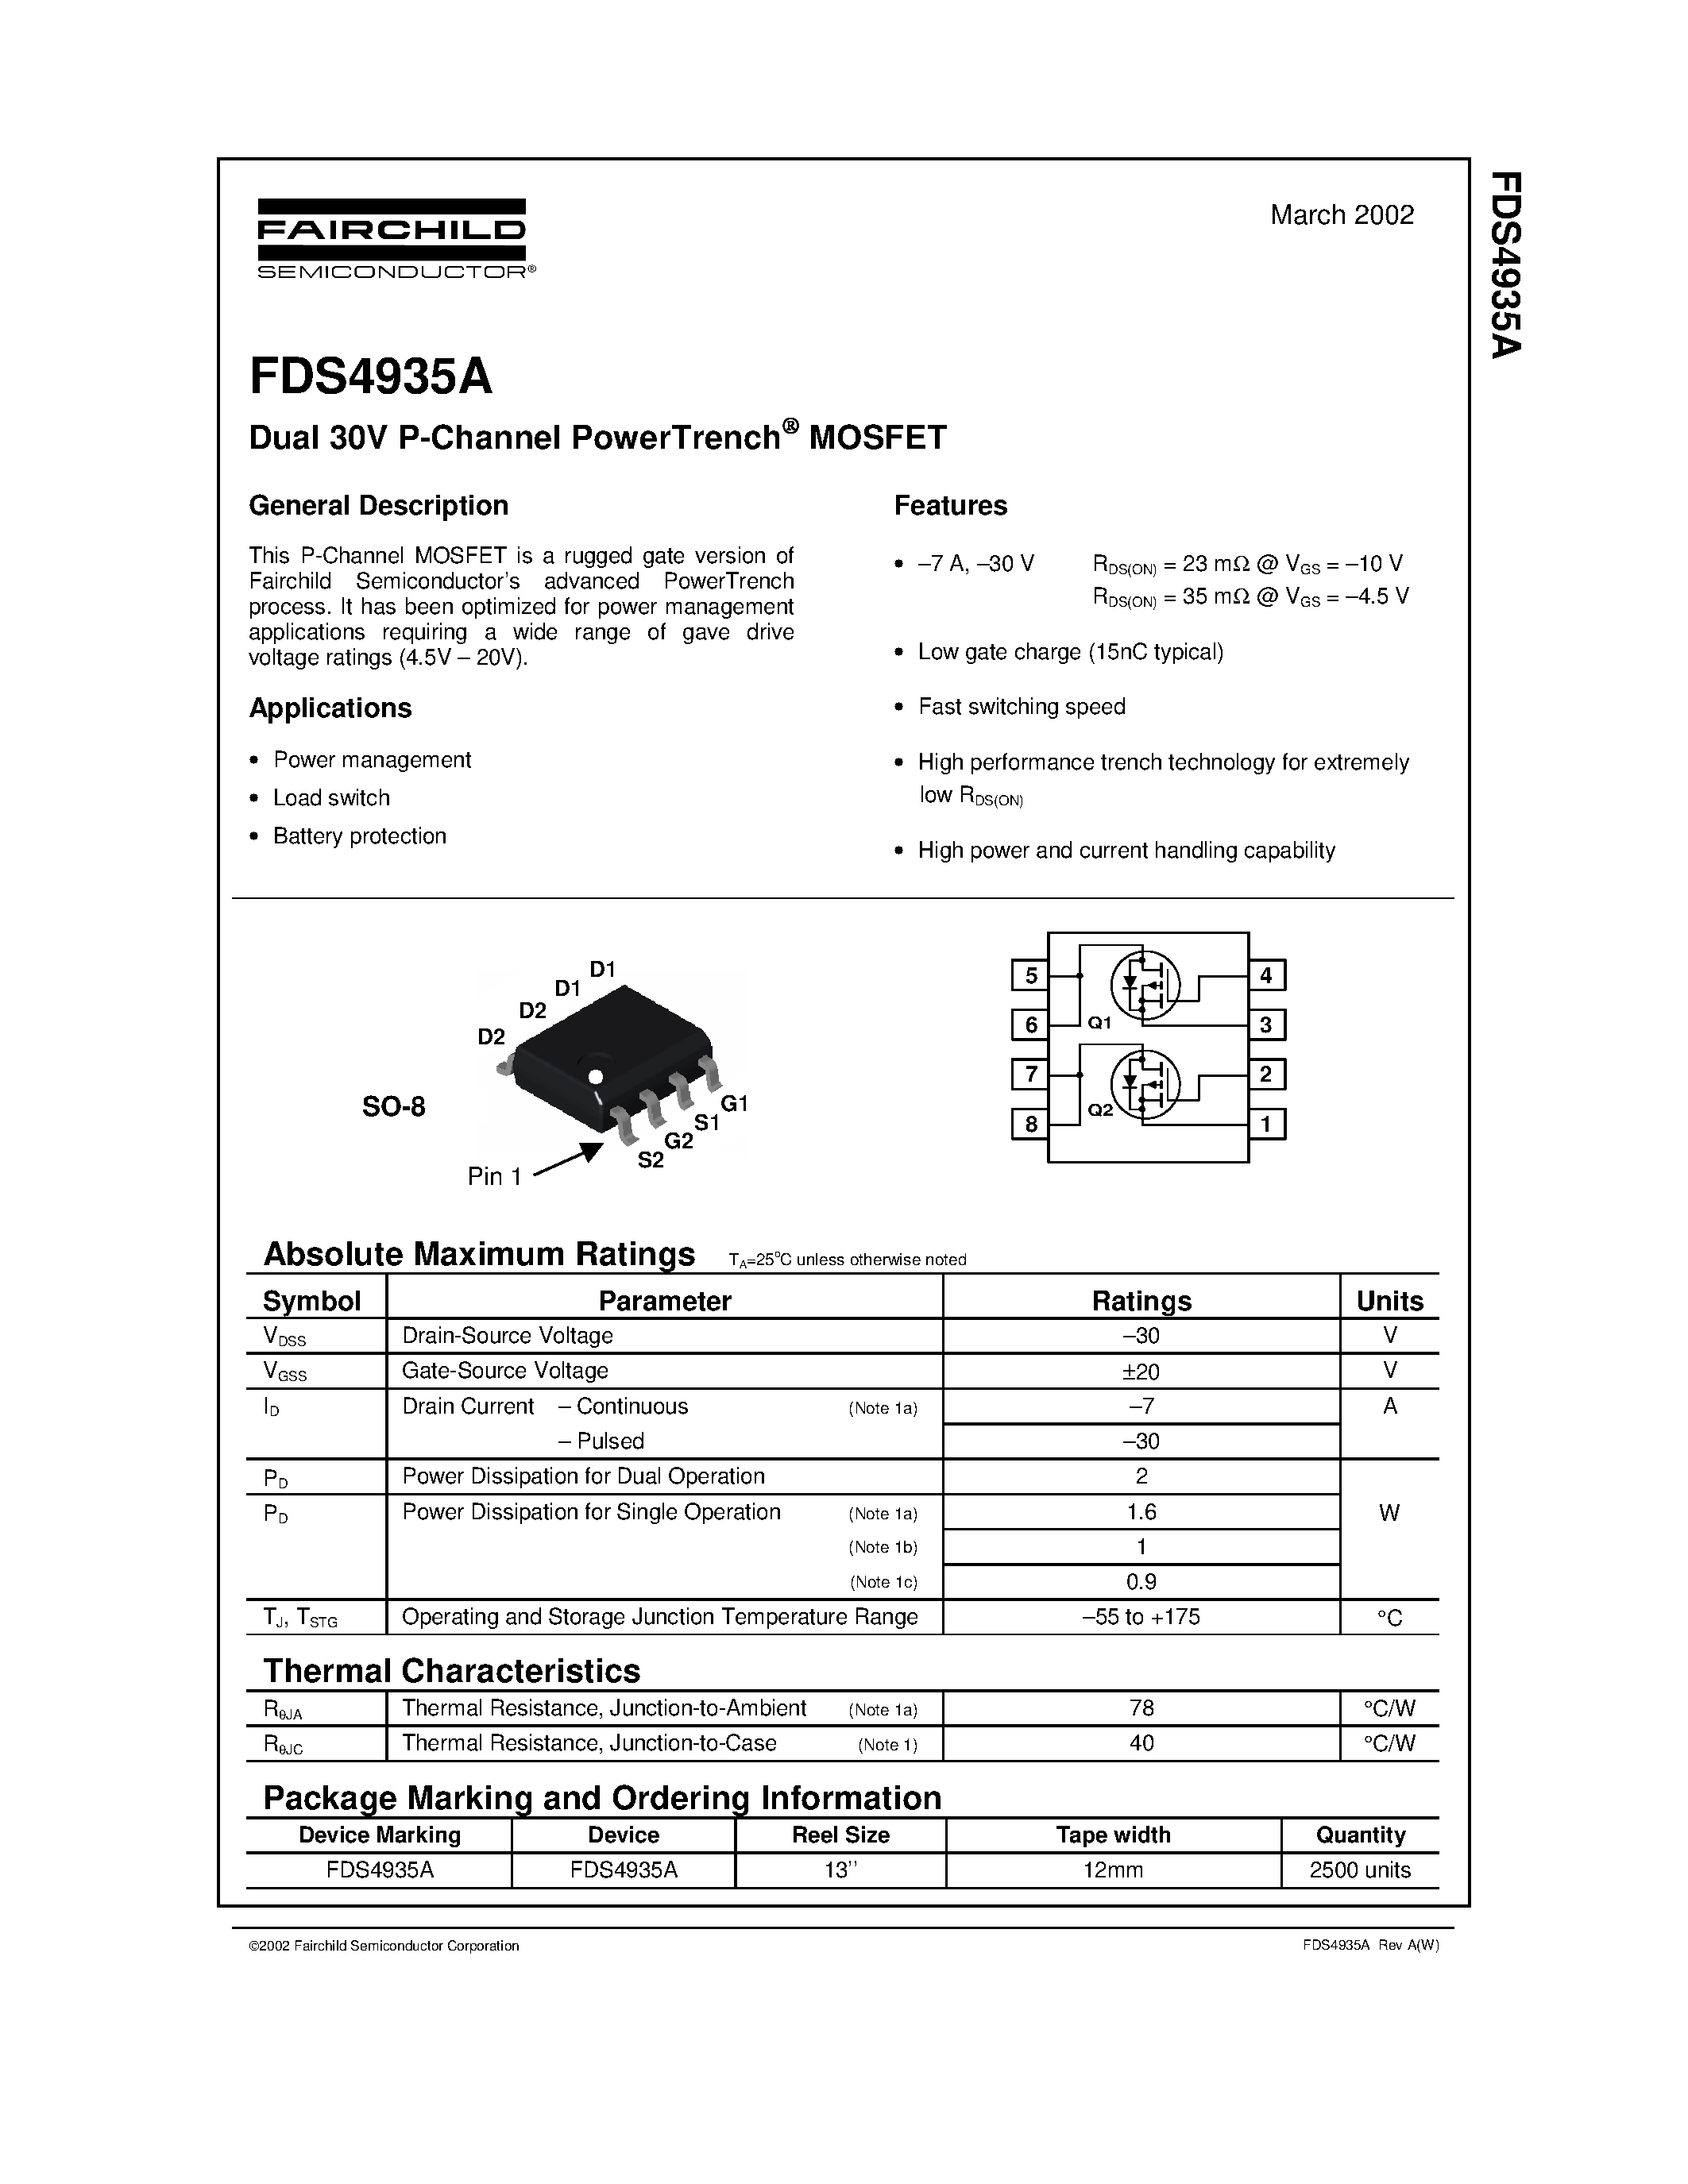 Даташит FDS4935 - Dual 30V P-Channel PowerTrench MOSFET страница 1